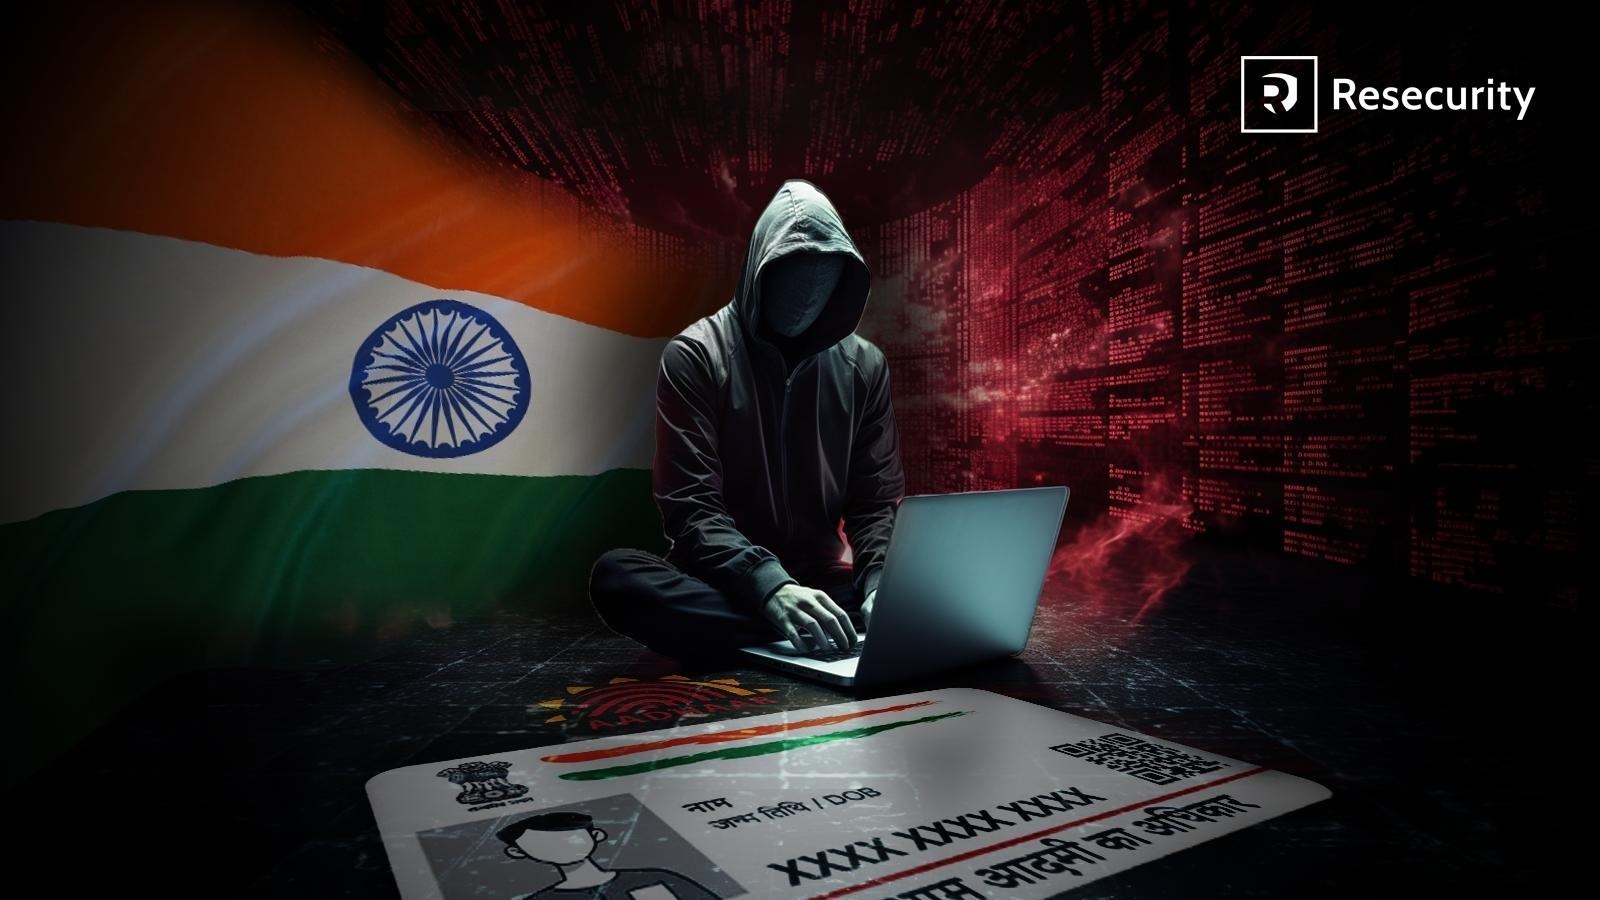 Resecurity: Insecurity of 3rd-parties leads to Aadhaar data leaks in India